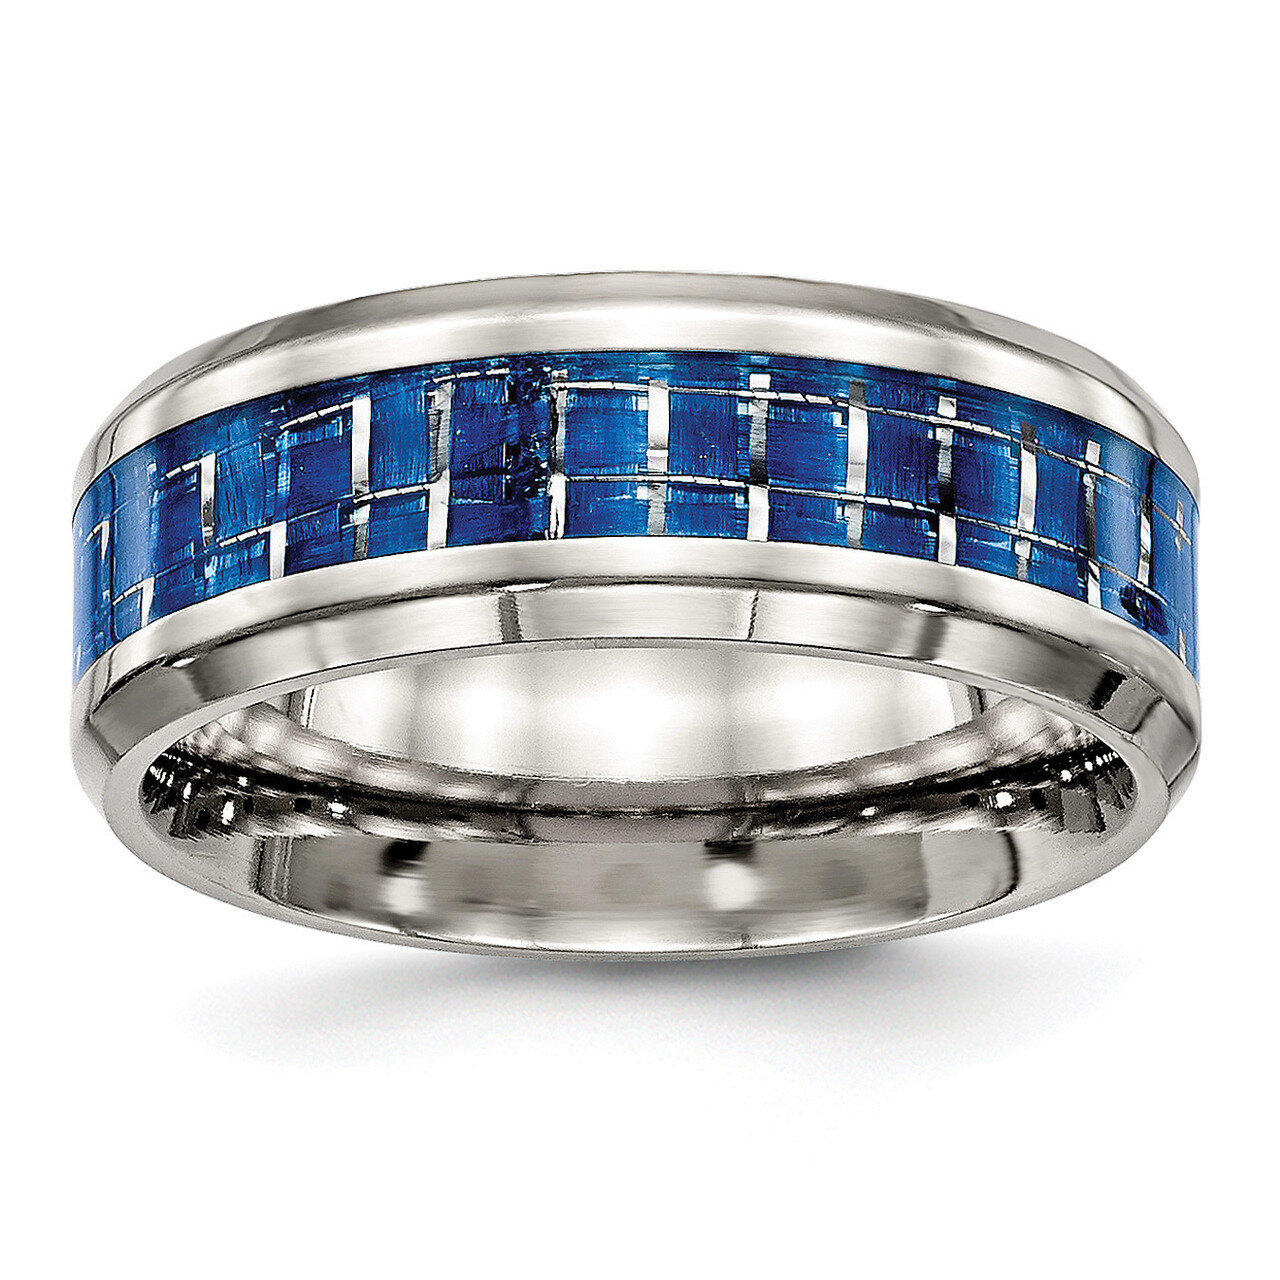 Blue White Carbon Fiber Inlay Ring Stainless Steel Polished SR503